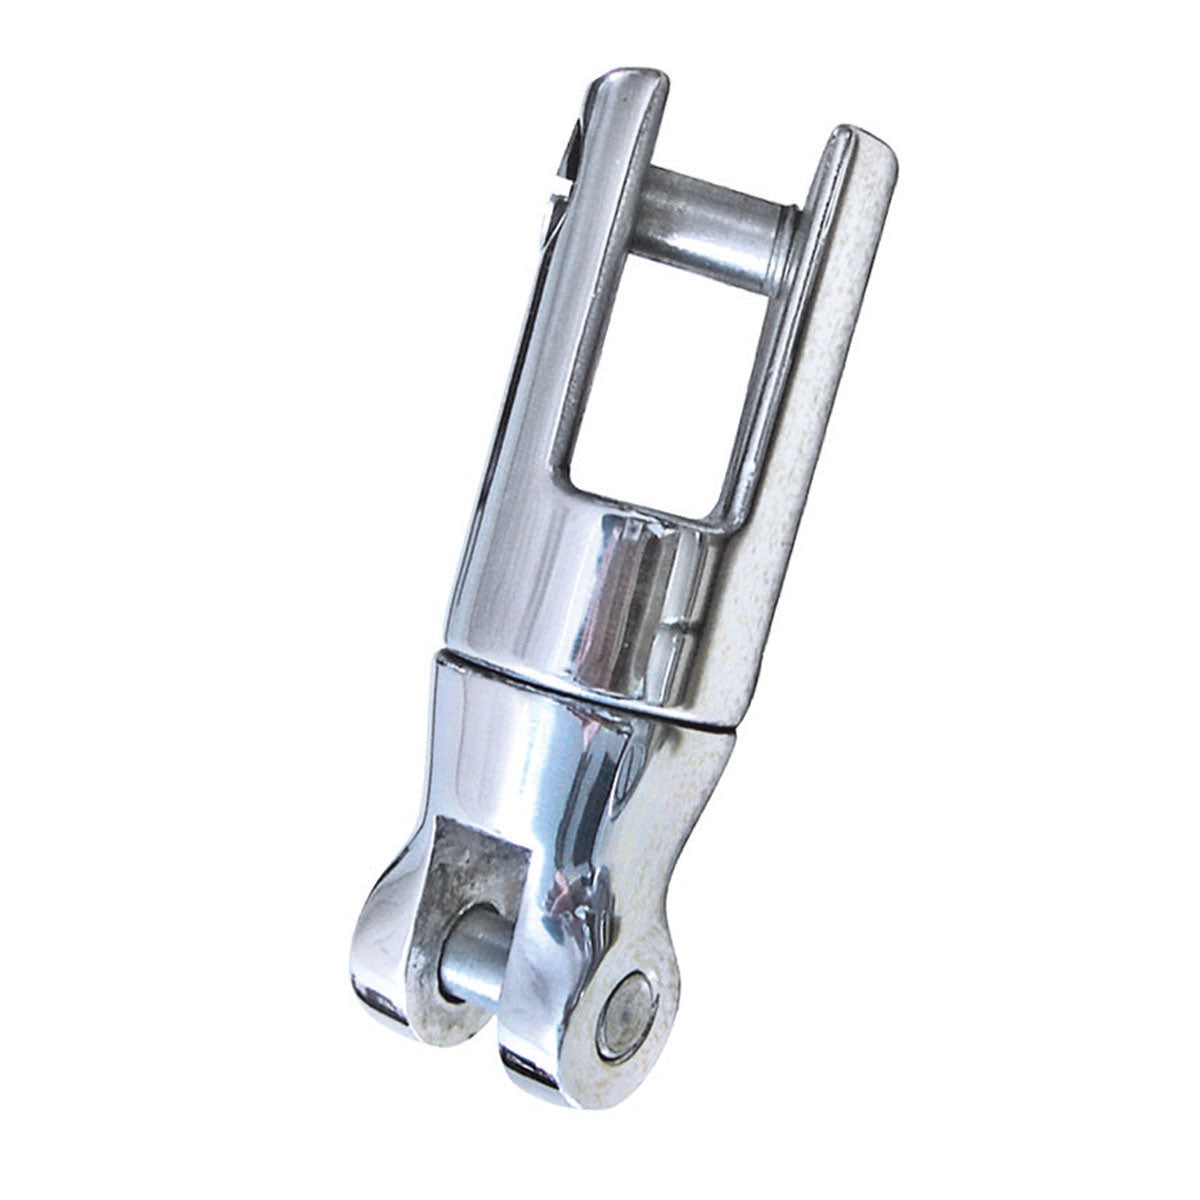 Stainless Steel Anchor Swivel for 10 / 12mm Chain